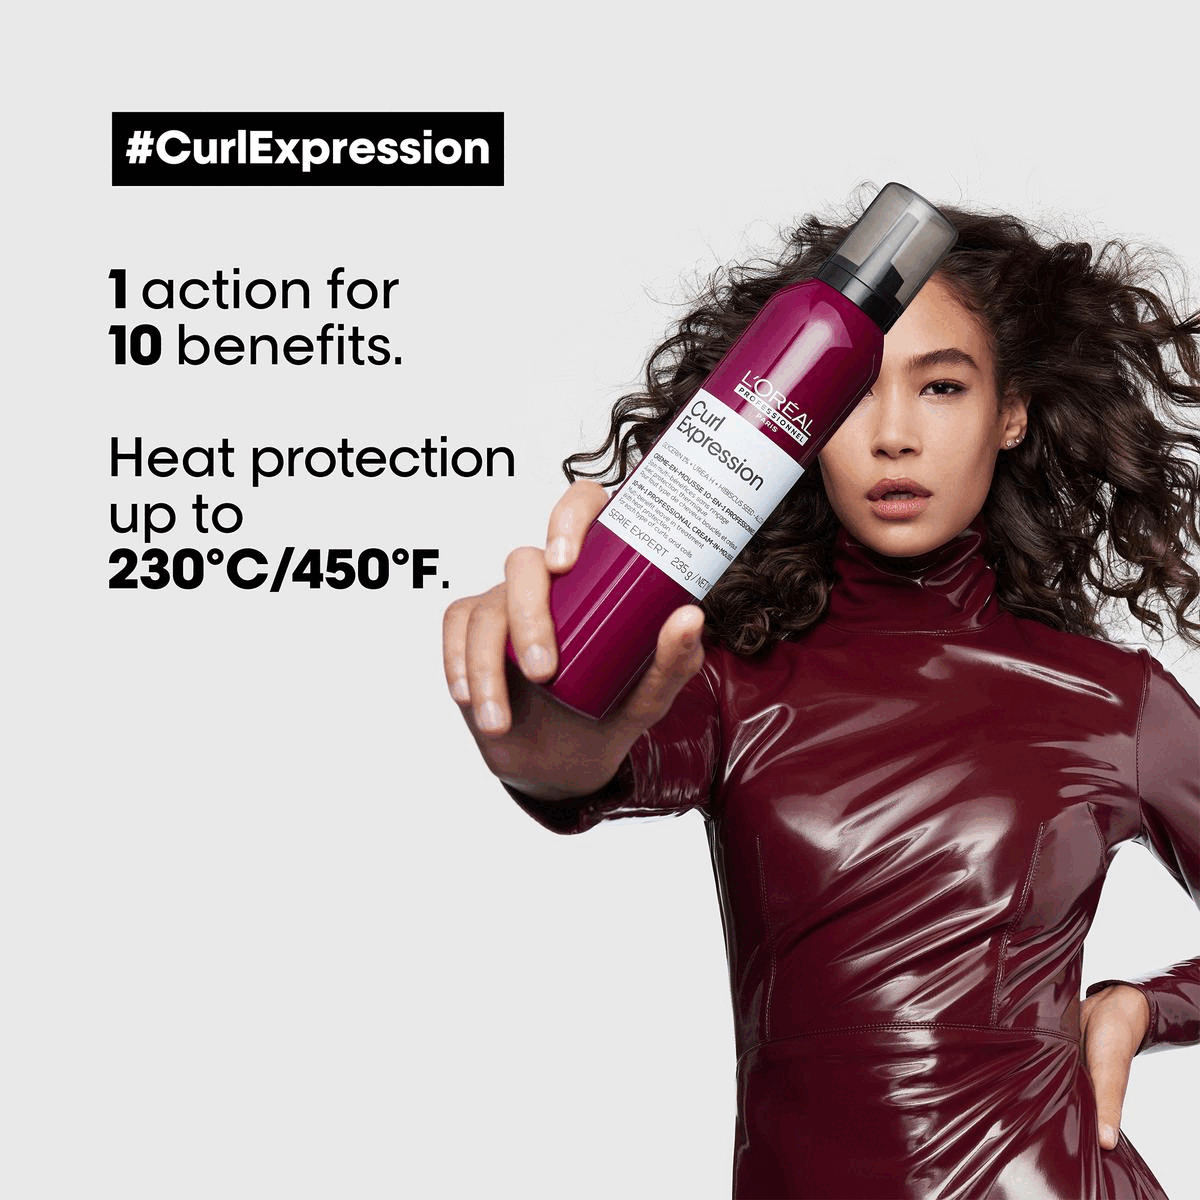 Image 1 - 1 action for 10 benefits. Heat protection up to 230C/450F. Image 2: My favourite 10-in-1 cream-in-mousse. The formula is silicone free for a natural hair feel. Customer review. Image 3: Highly Concentrated actives. Hibiscus seed. Glycerin. Urea H. Image 4. Before and After. Hair is not retouched. Image 4: 250ml 8.5fl. oz Image 5: #CurlExpression Co-developed with curl experts for each type of curls and coils. Image 6: I love this range! Because you want your curls to be seen, you want them to POP and I think the Curl Expression range does just that. [Derick Monroe] Celebrity hairstylist. Image 7: Express your curls the pro way.